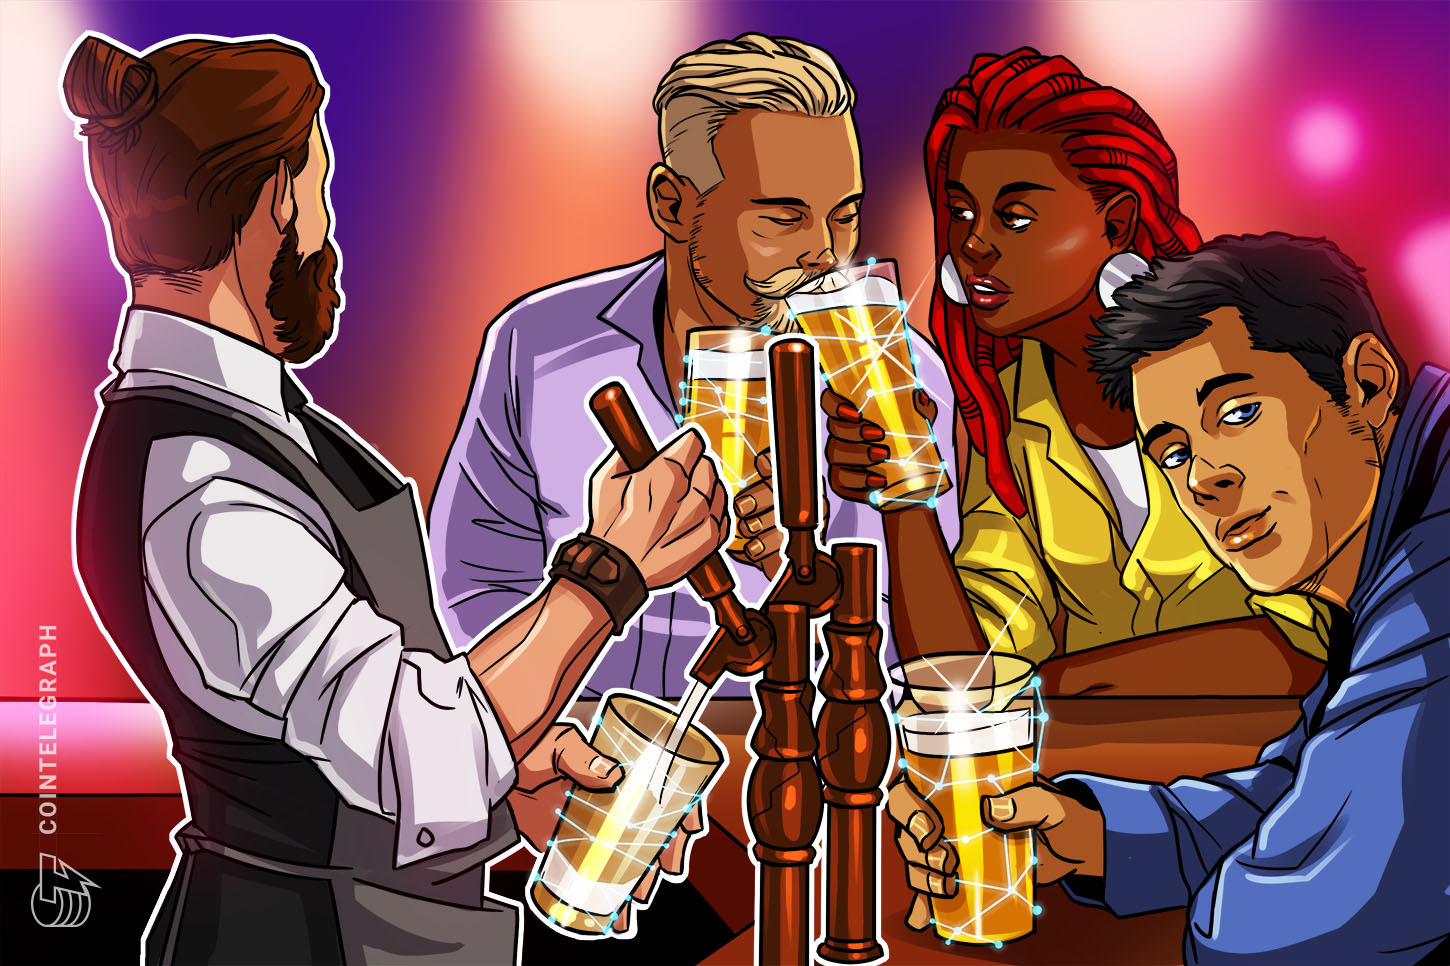 Anheuser-Busch considers integrating blockchain additional into its beer manufacturing line